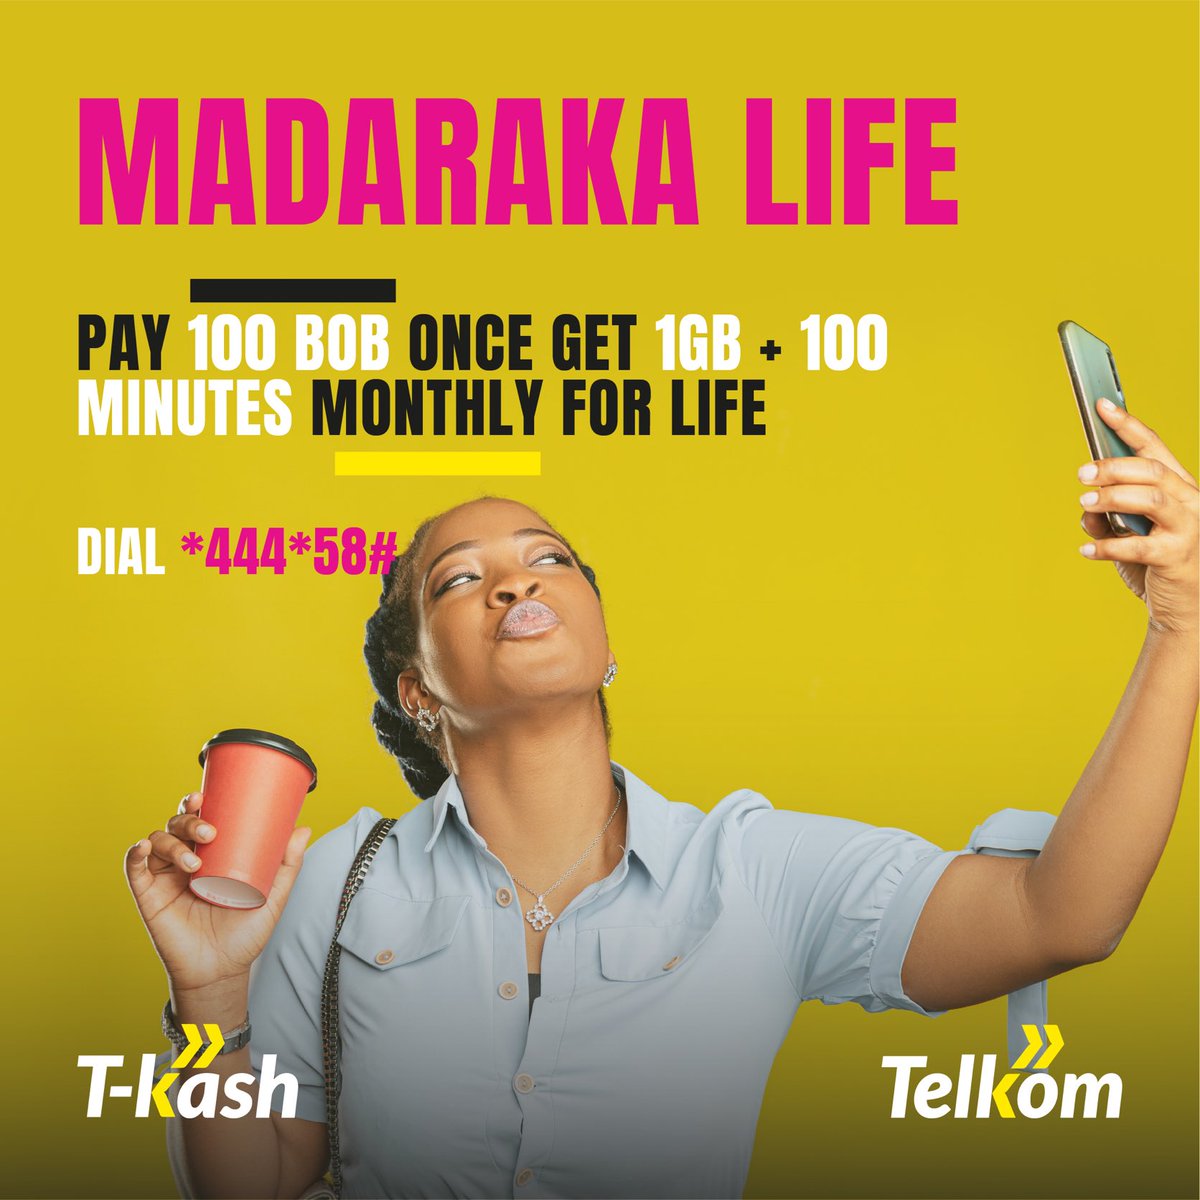 #madarakalife TelkomKe is here wit h us again with amazing offers